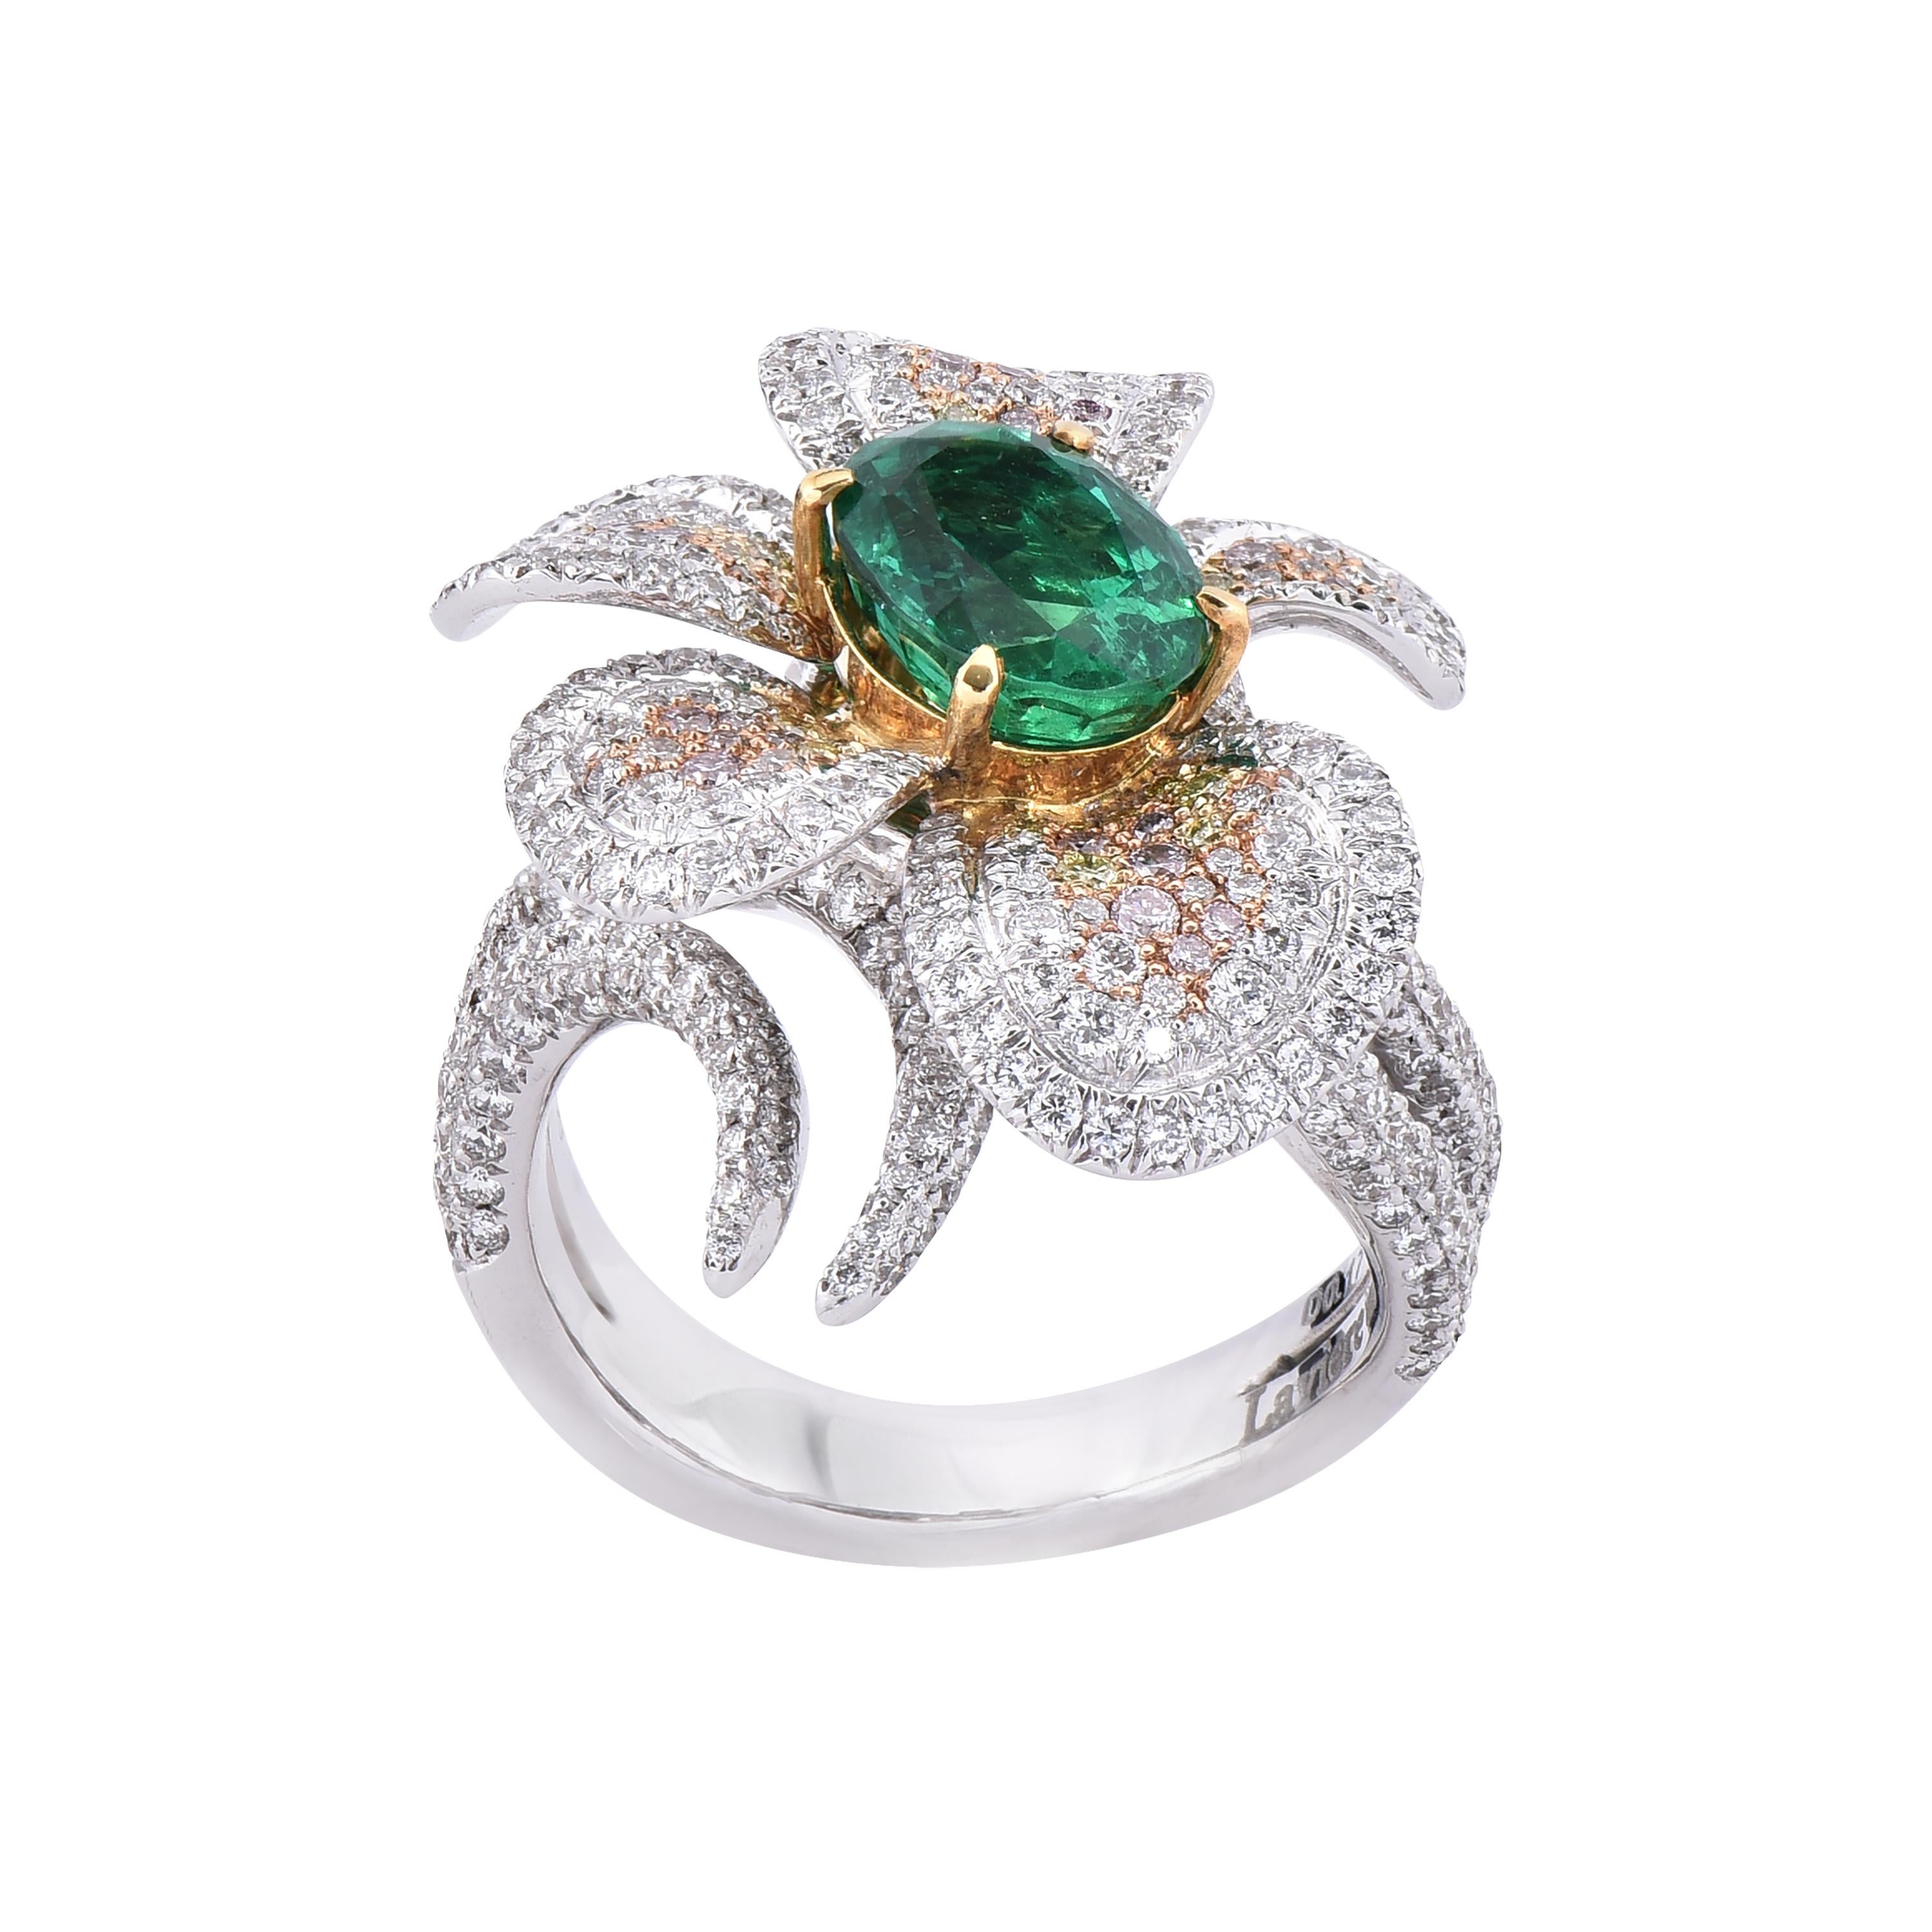 18 karat white & yellow gold emerald statement ring from the Veronese collection of Laviere. The ring is set with a 2.23 carats oval shape emerald, 2.11 carats round brilliant white, fancy pink and fancy yellow diamonds. 
Gold Weight 14.05 grams.